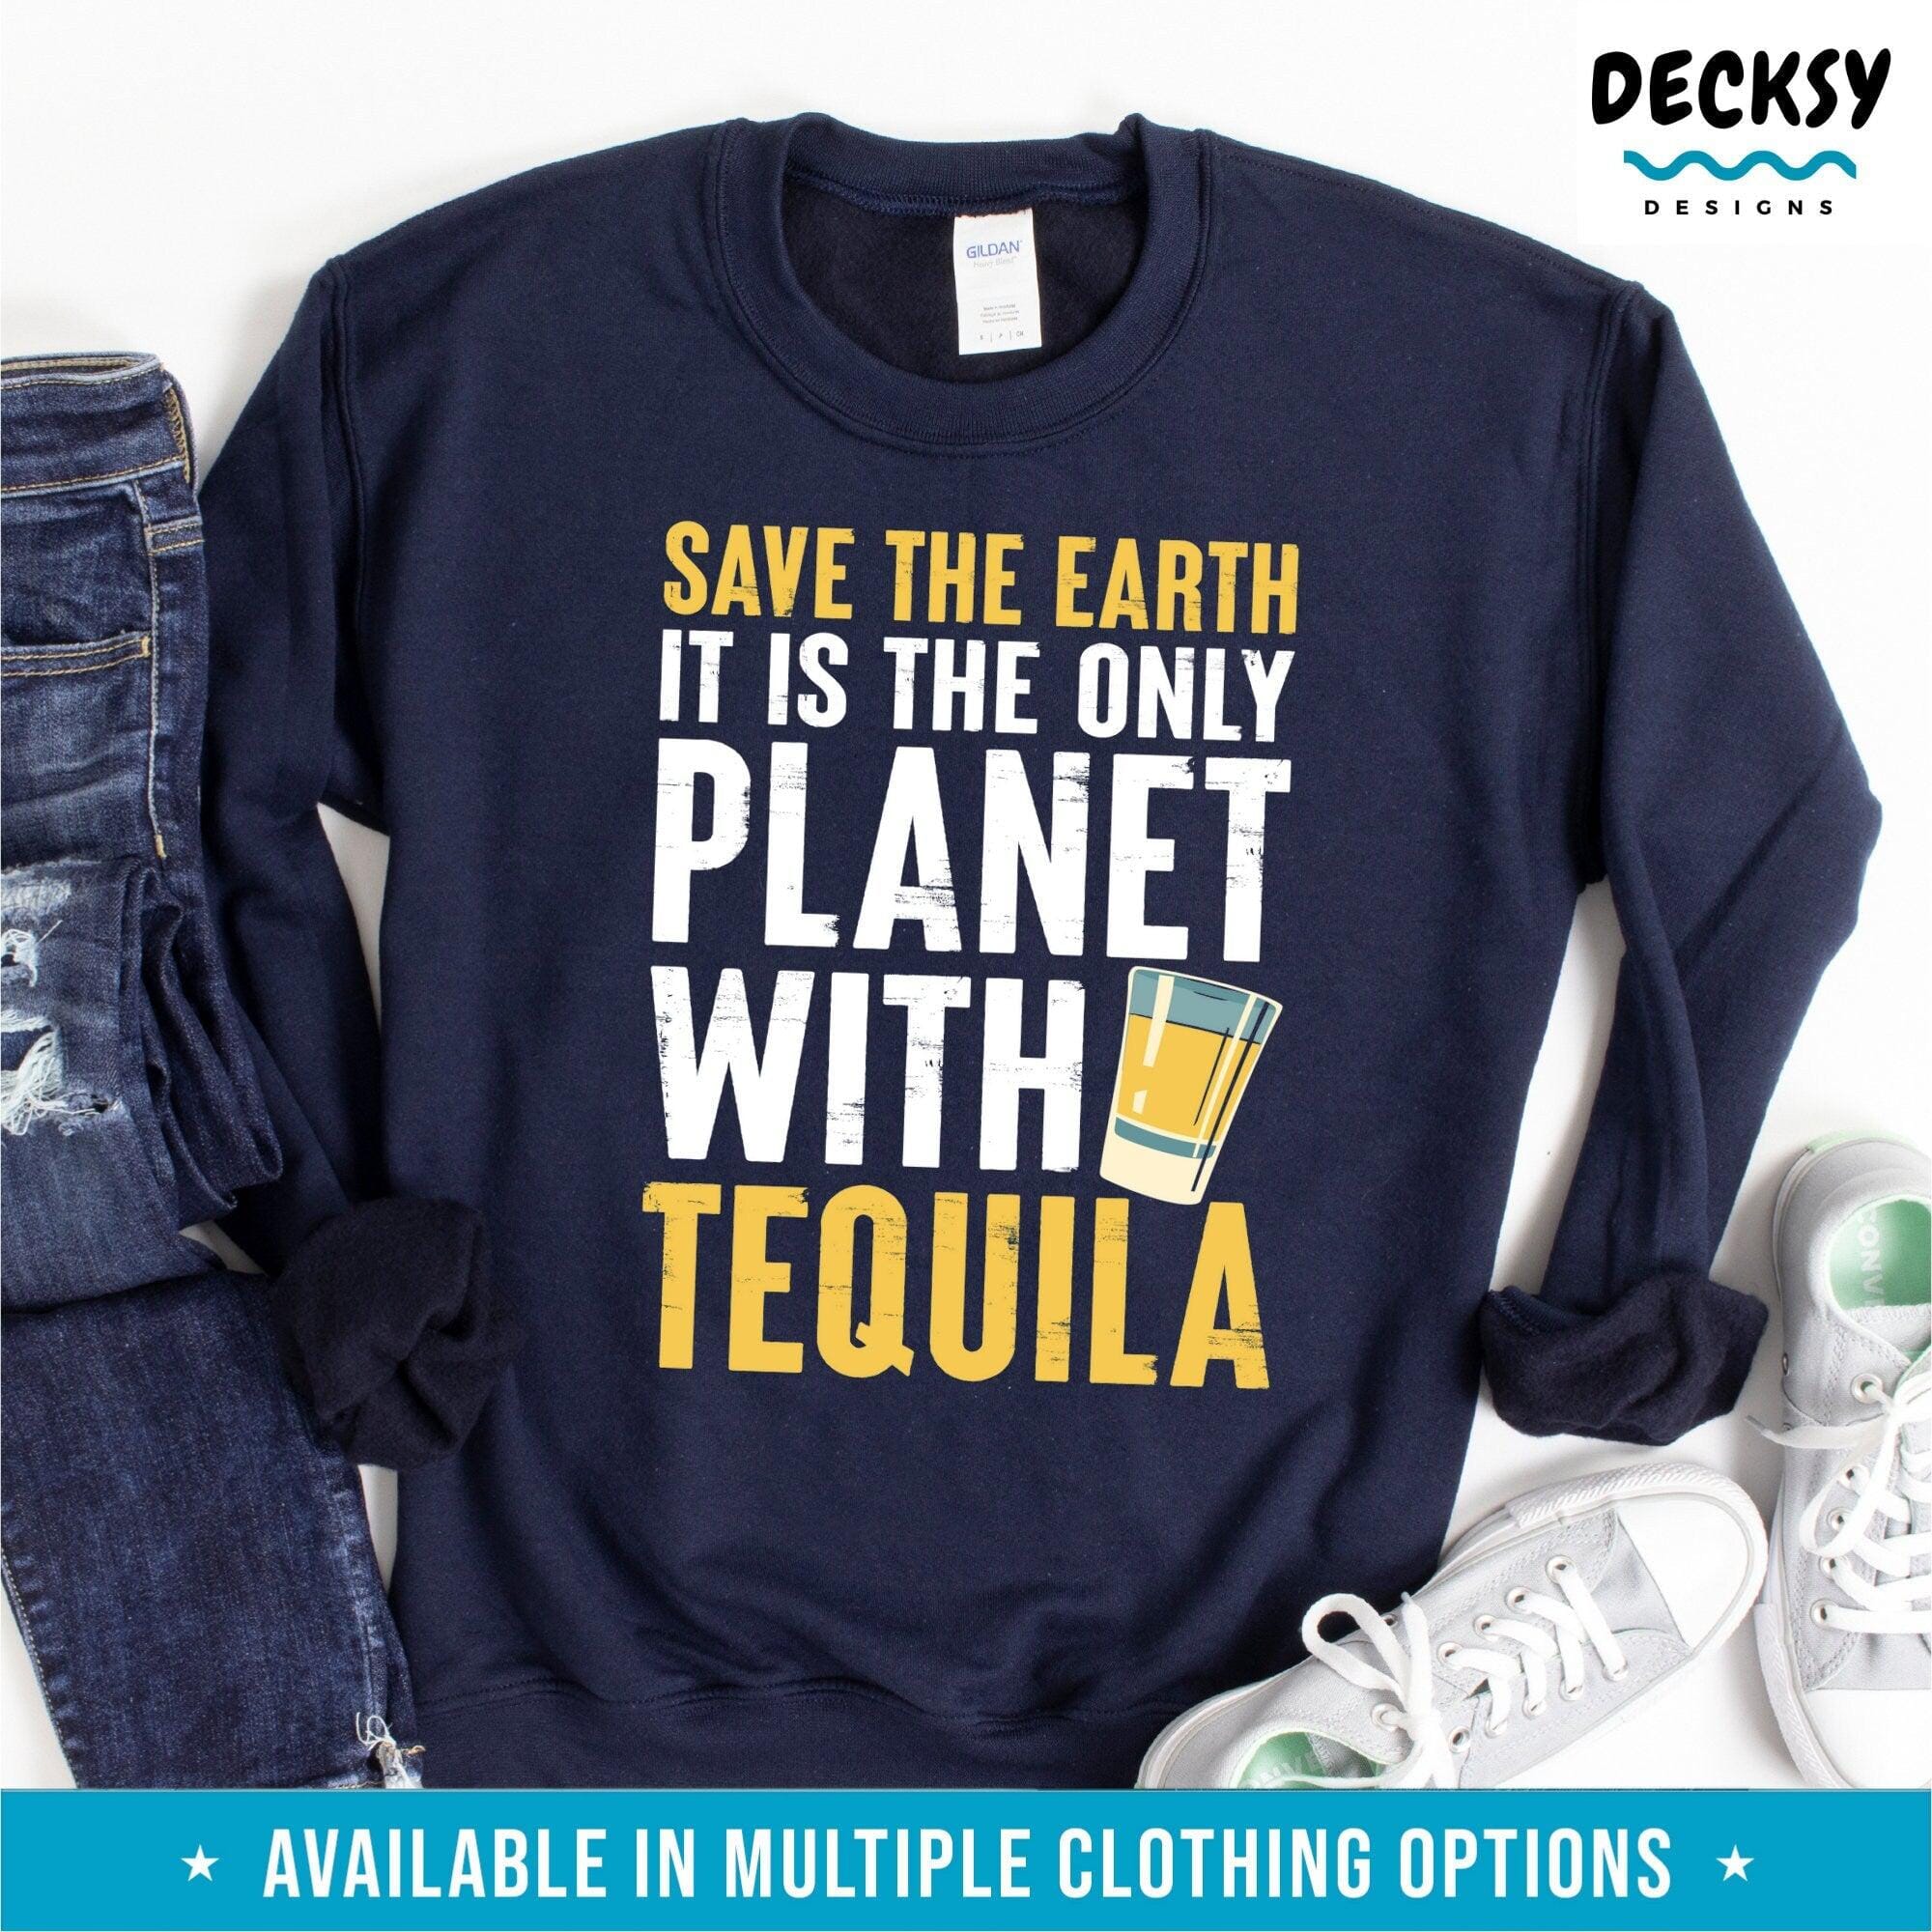 Tequila Lover Shirt, Funny Tequila Gift-Clothing:Gender-Neutral Adult Clothing:Tops & Tees:T-shirts:Graphic Tees-DecksyDesigns